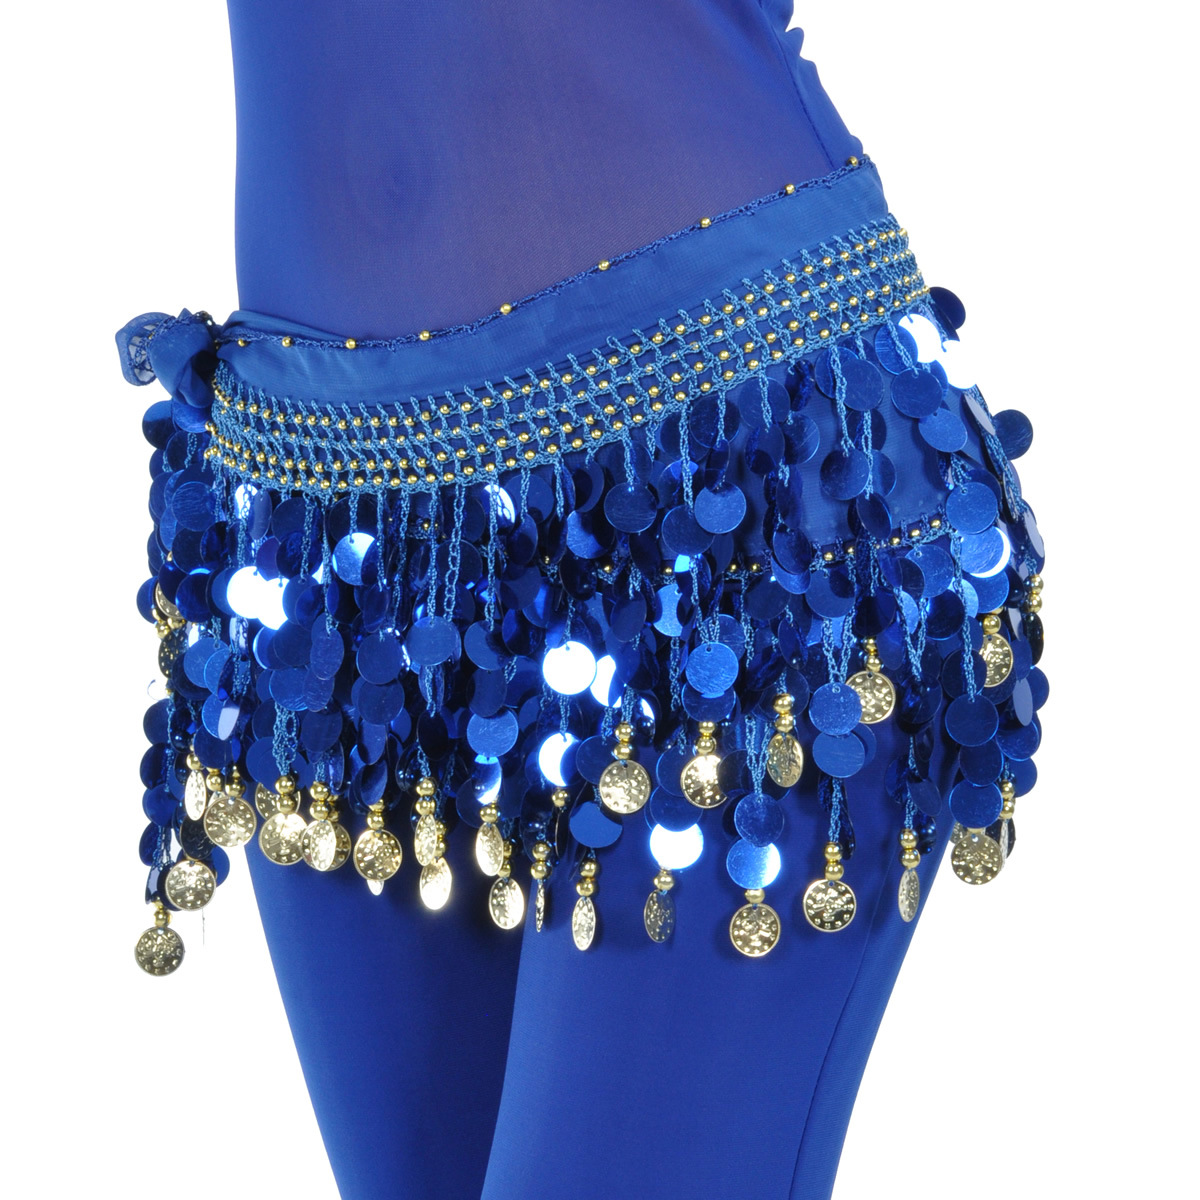 Dancewear chiffon gold coins belly dance hip scarf more colors